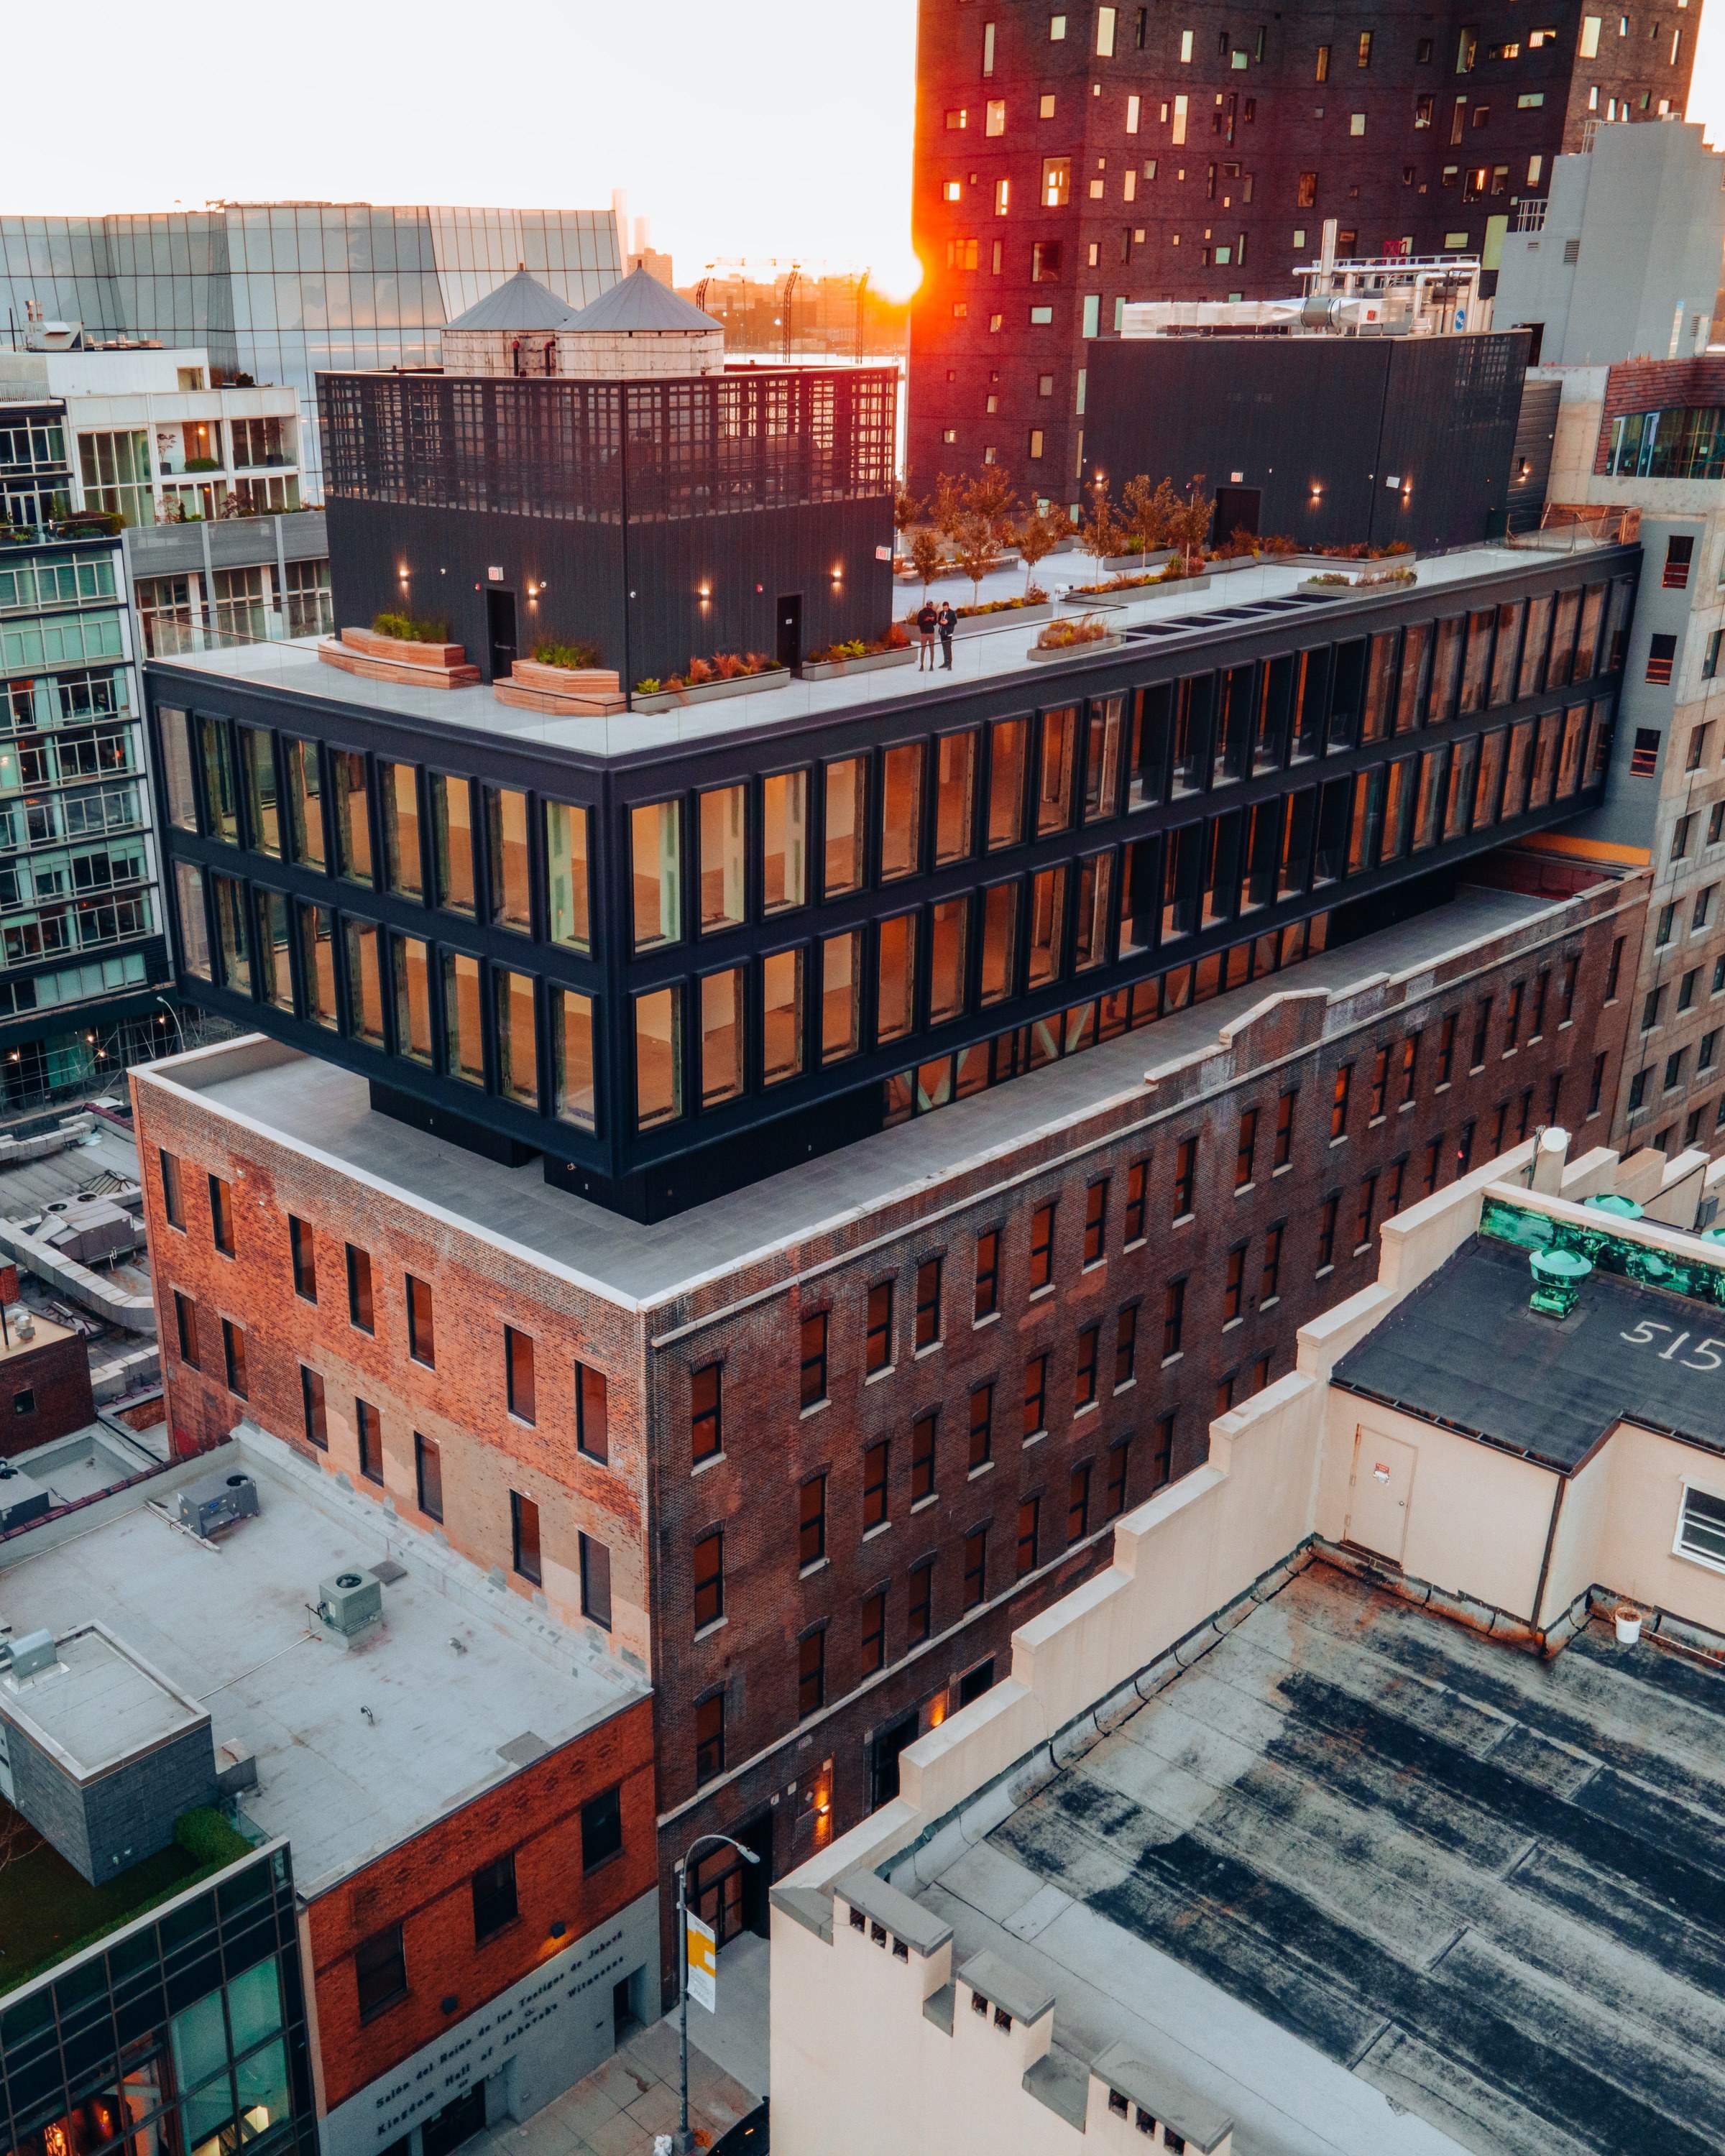 Aerial photo of a modern addition build atop a more historical building in a urban setting.